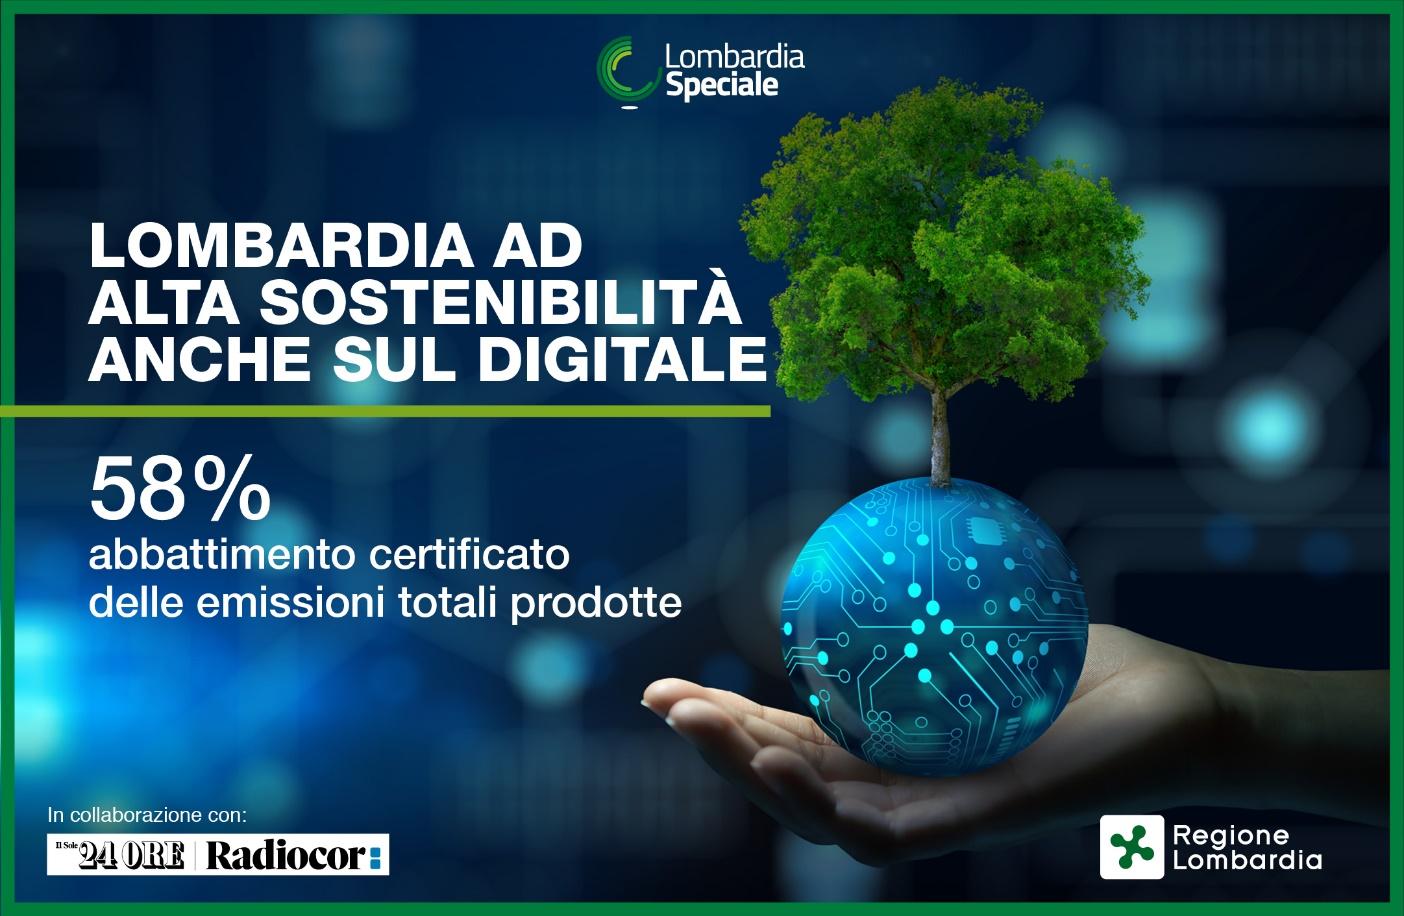 Highly sustainable Lombardy Region also on digital
58% certified abatement of total emissions produced